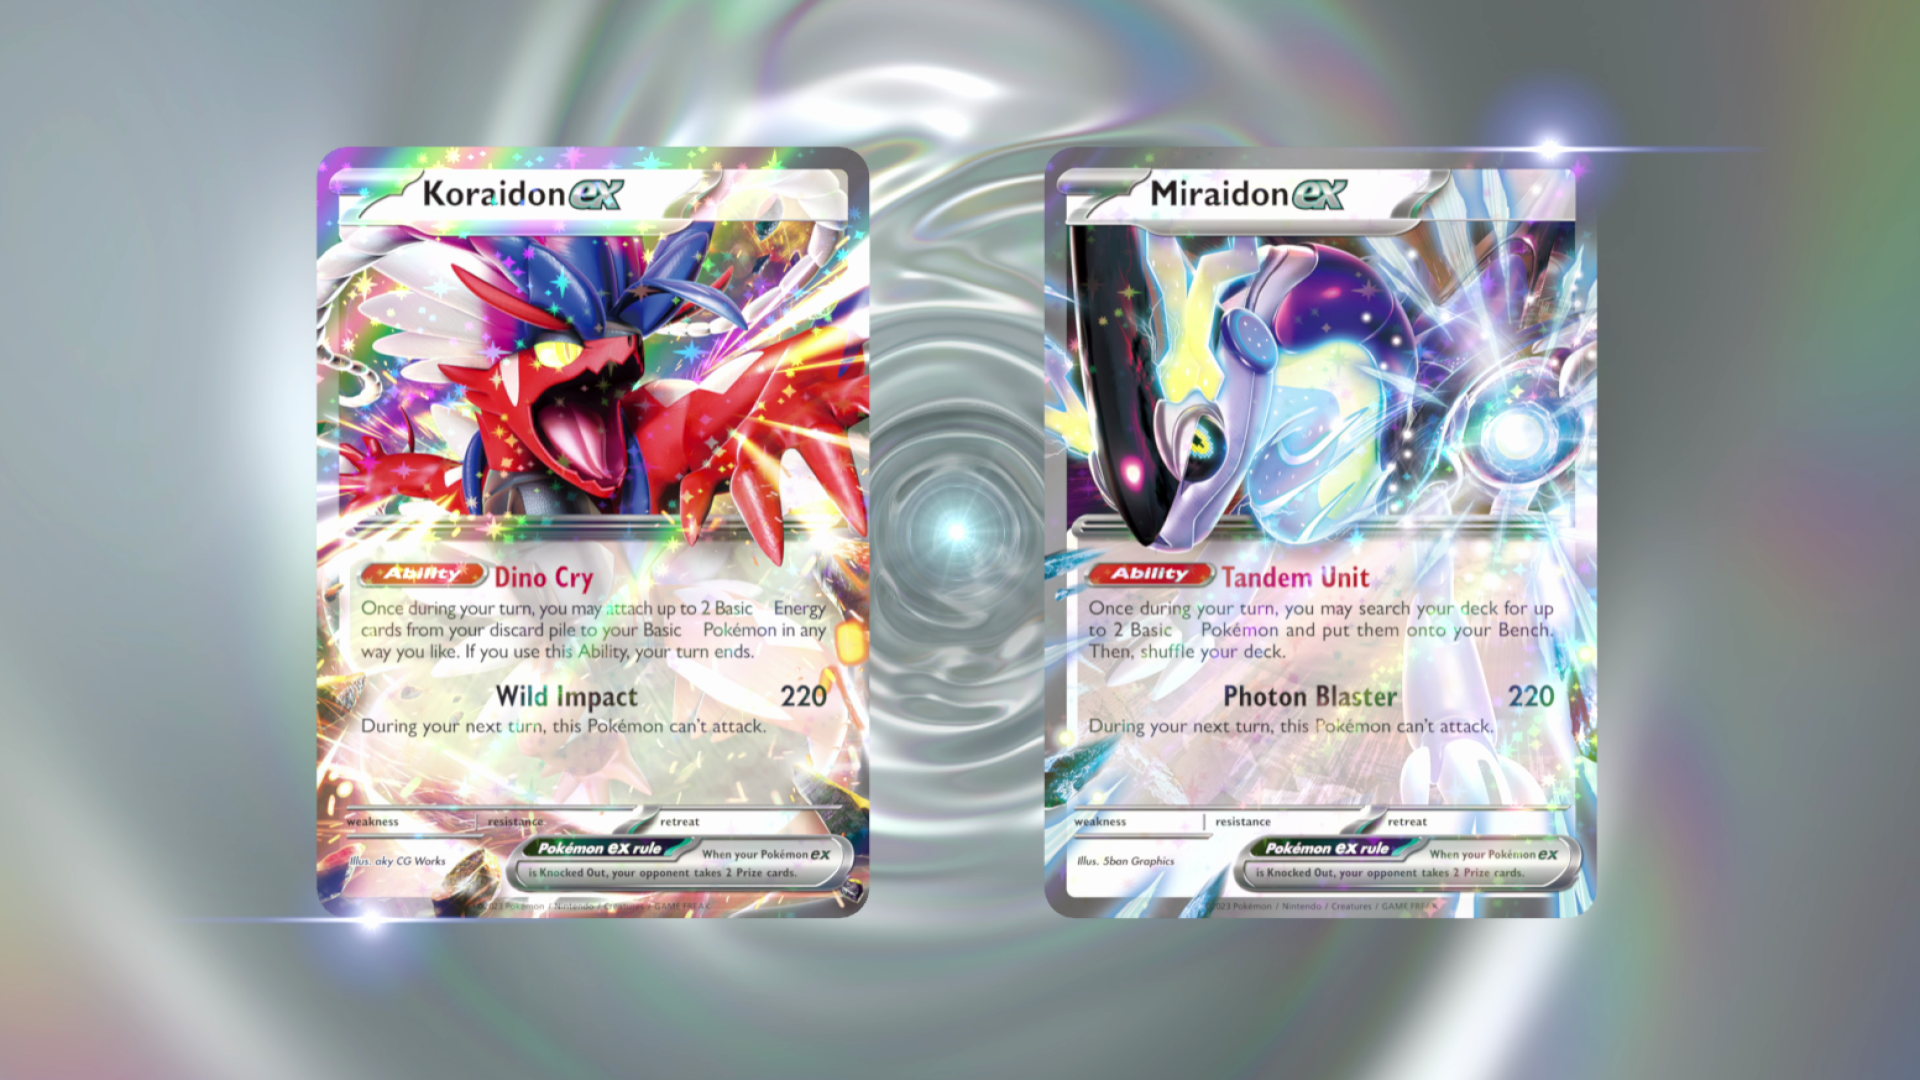 Koraidon-ex and Miraidon-ex from the upcoming TCG set for Scarlet and Violet